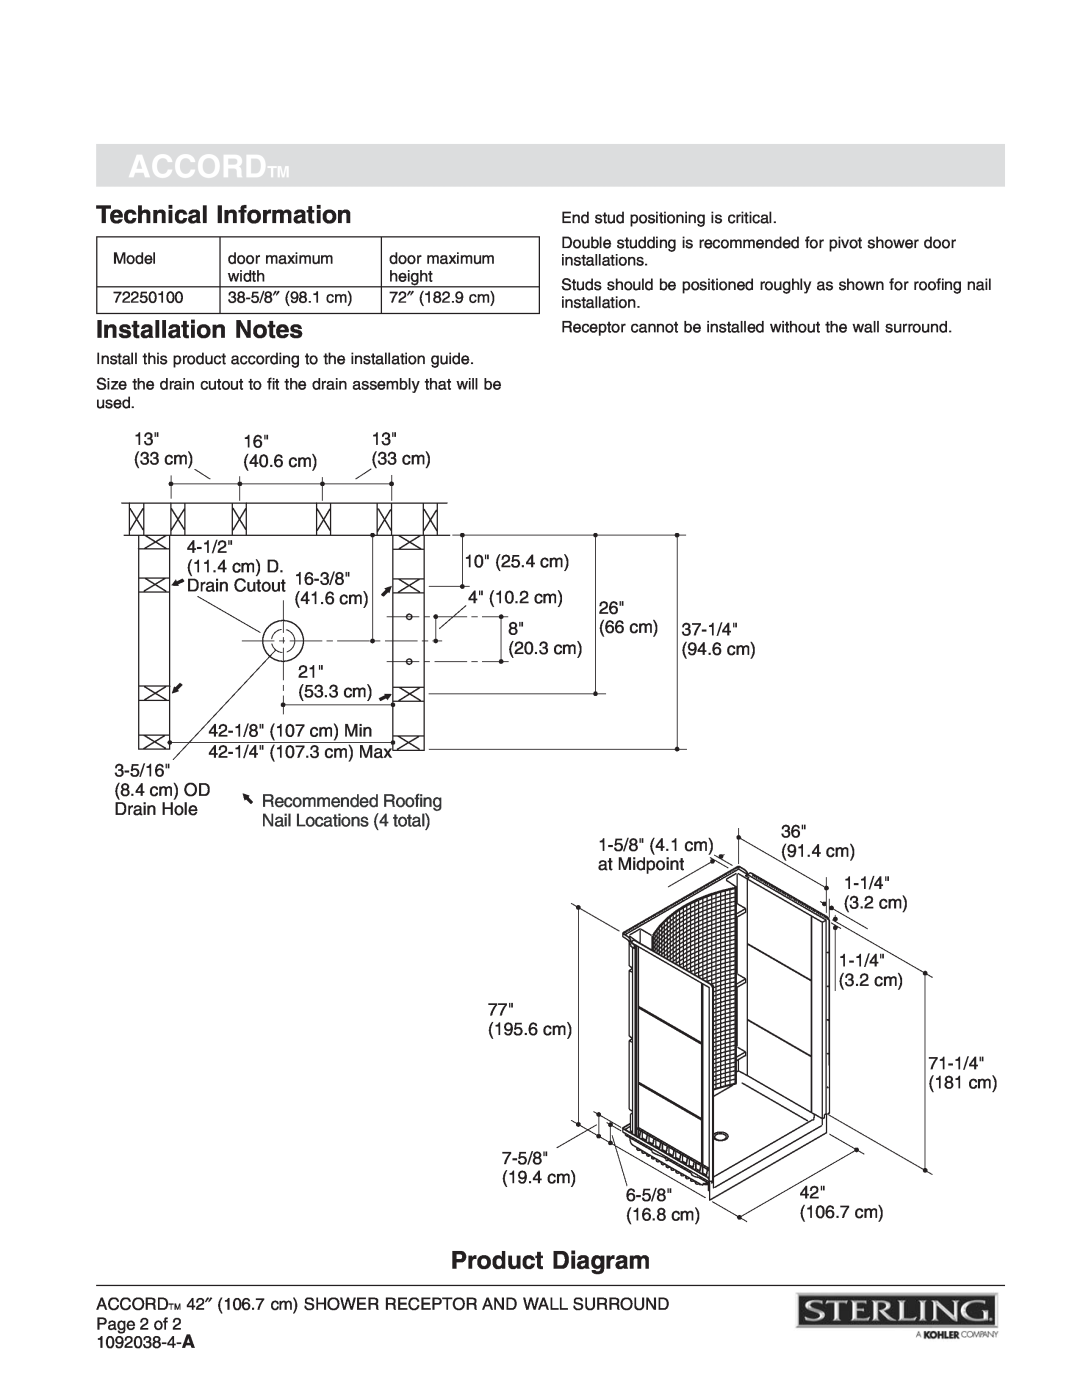 Sterling Plumbing 72250100 warranty Technical Information, Installation Notes, Product Diagram, Accordtm 